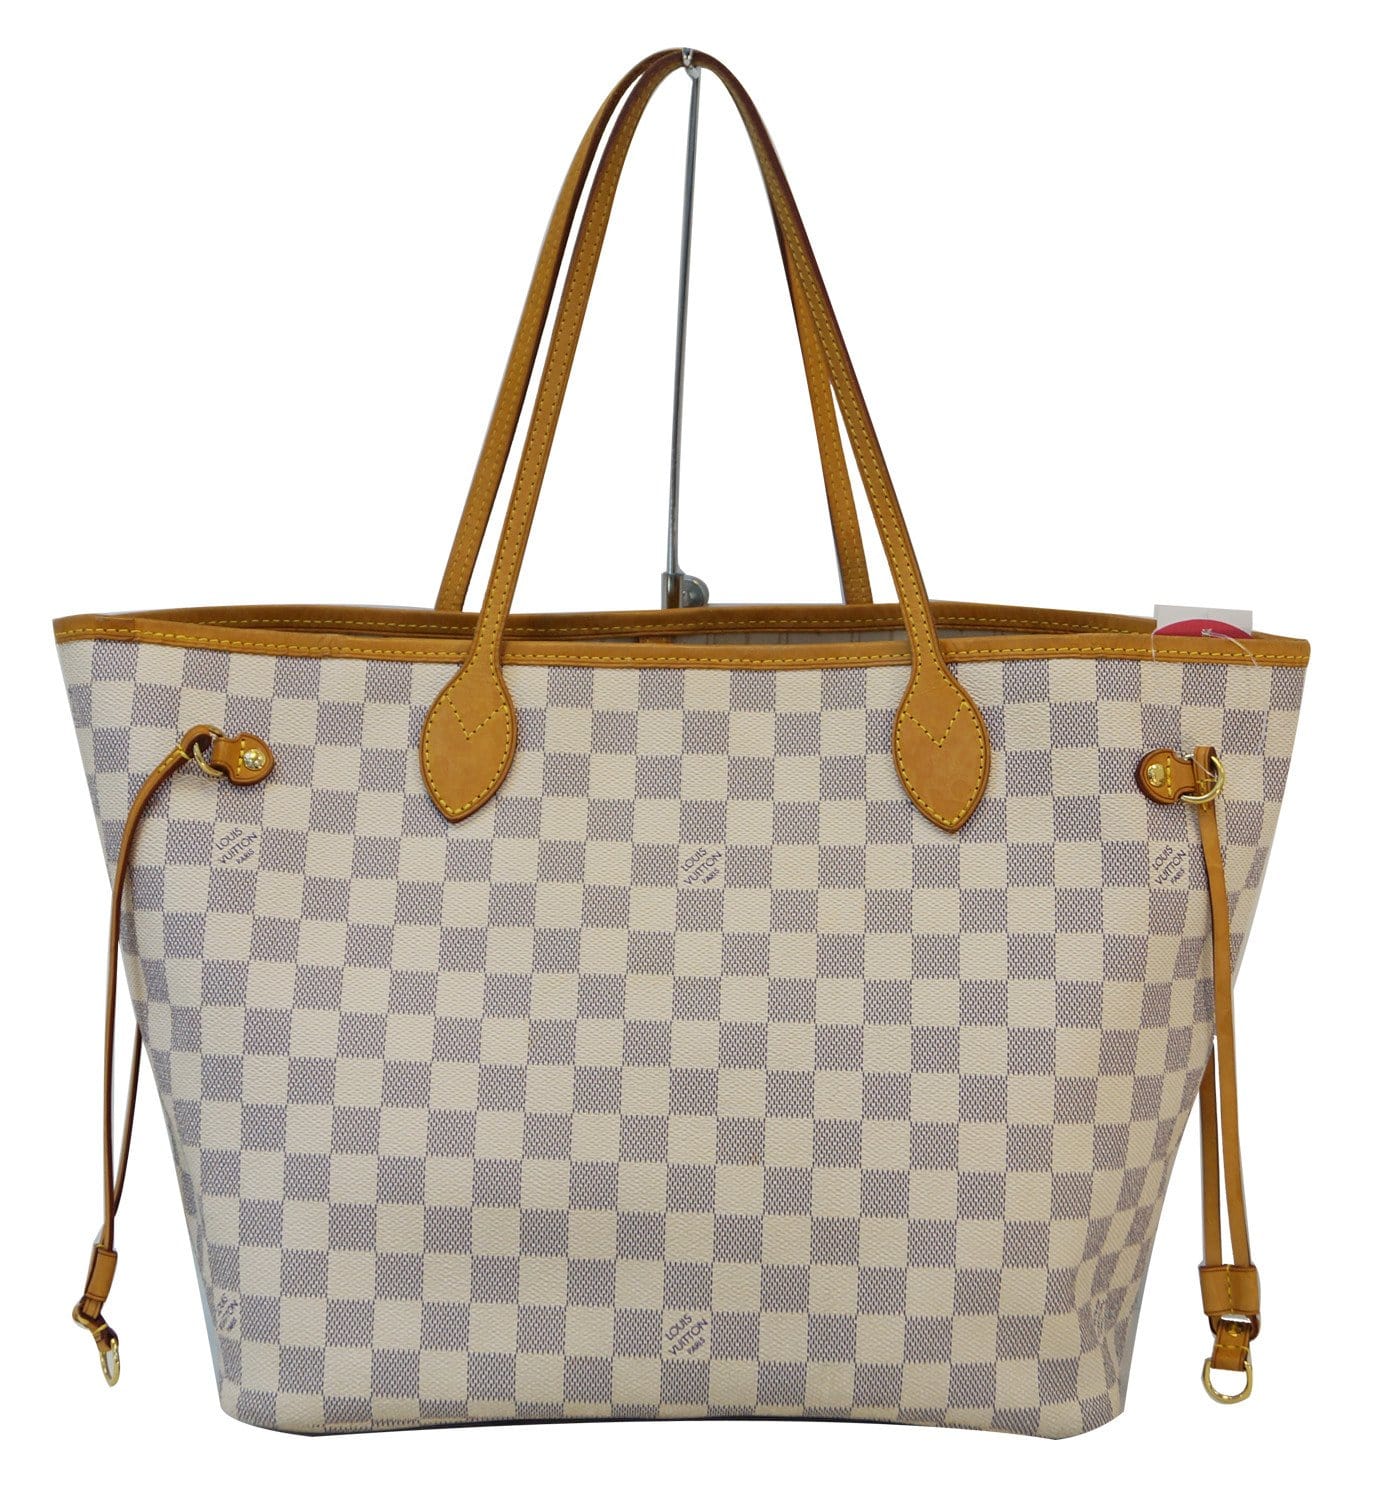 Lot - Louis Vuitton Neverfull MM Tote Bag, in Damier Azur coated canvas